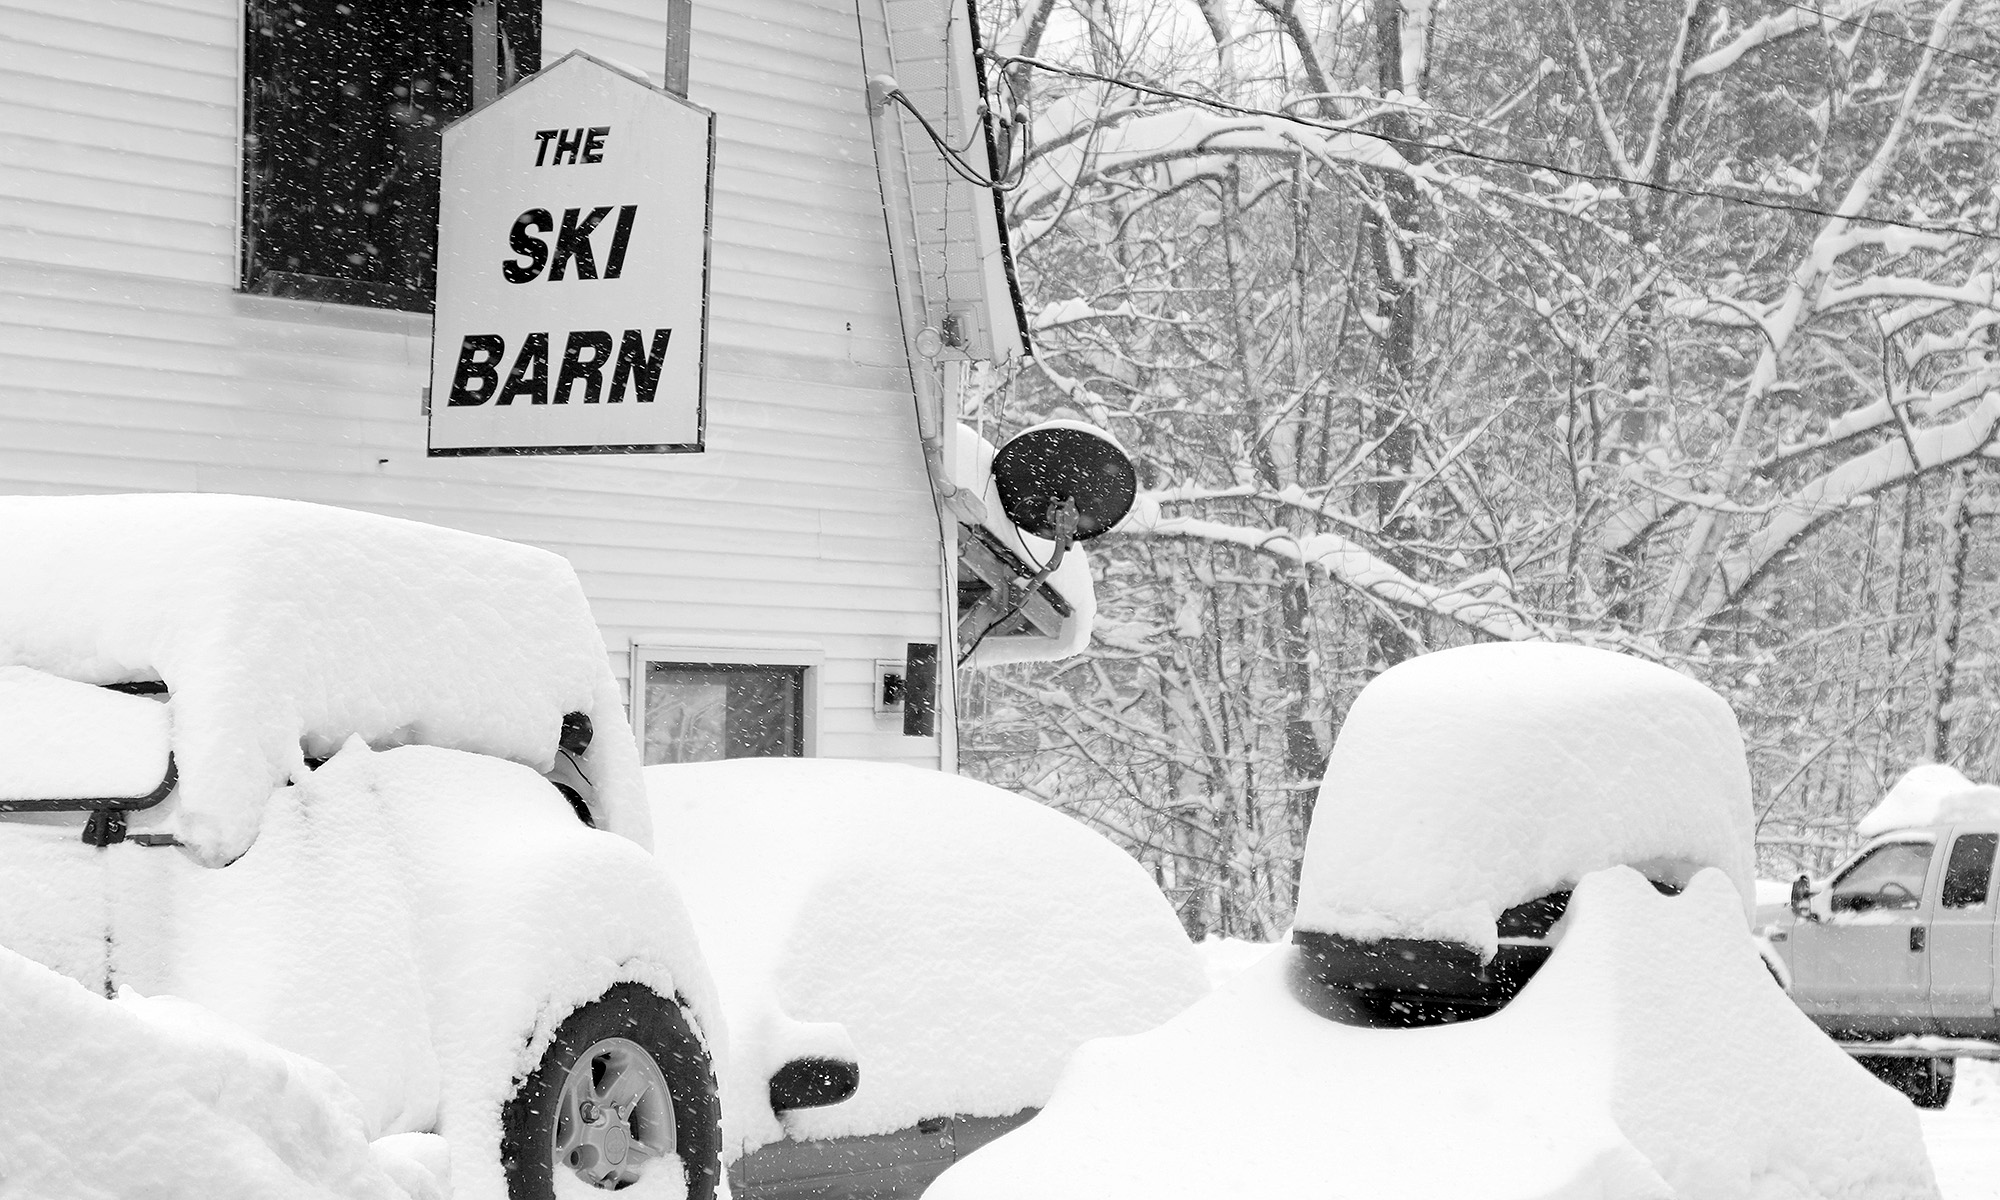 An image of heavy snow accumulations from Winter Storm Skylar at the Ski Barn area along the Bolton Valley Access Road near Bolton Valley Ski Resort in Vermont